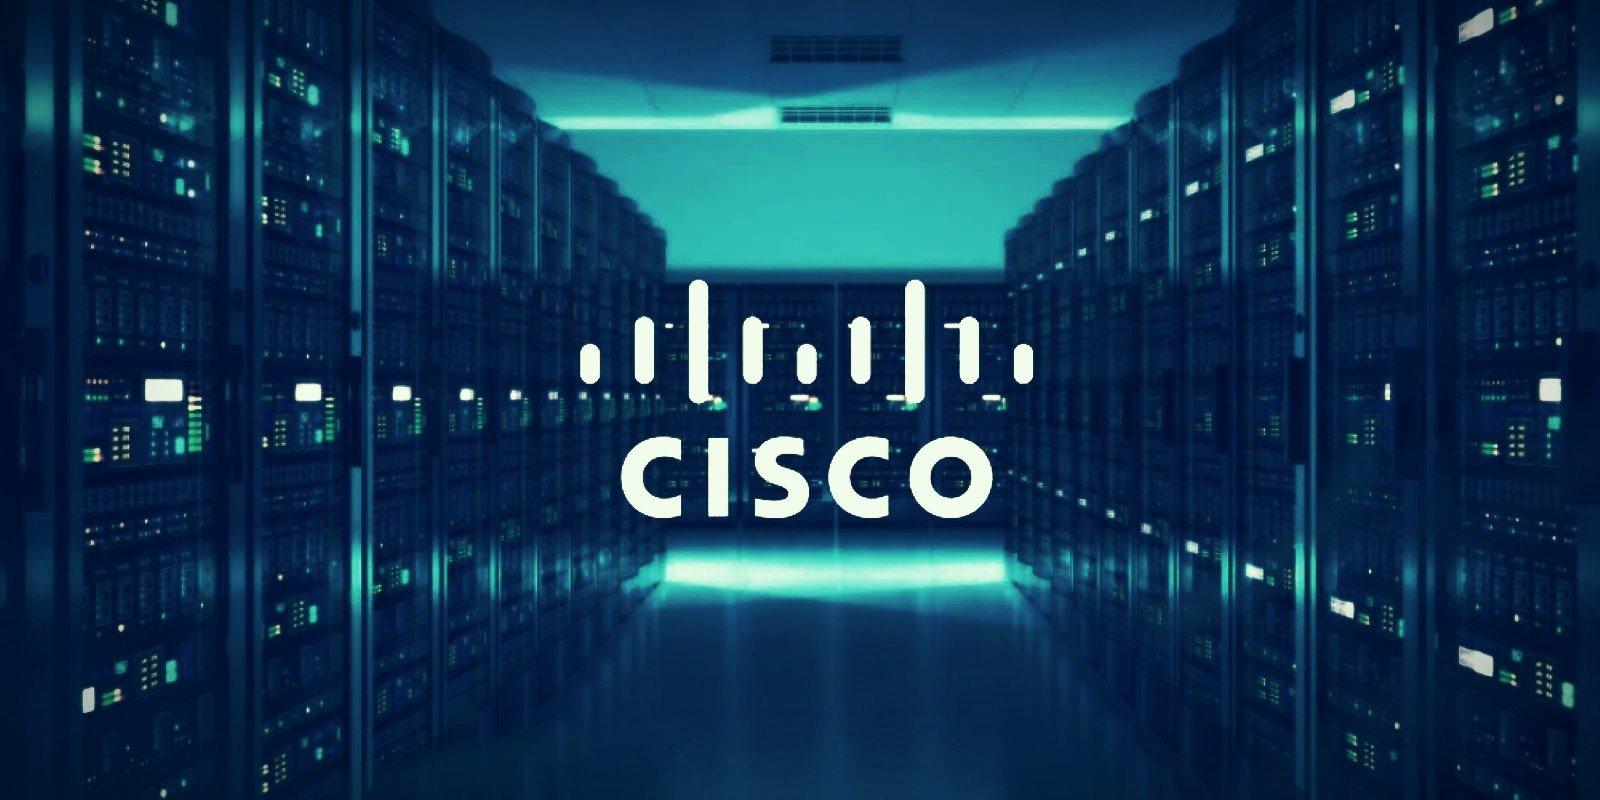 Cisco - A Revolution at the Edge of Connectivity